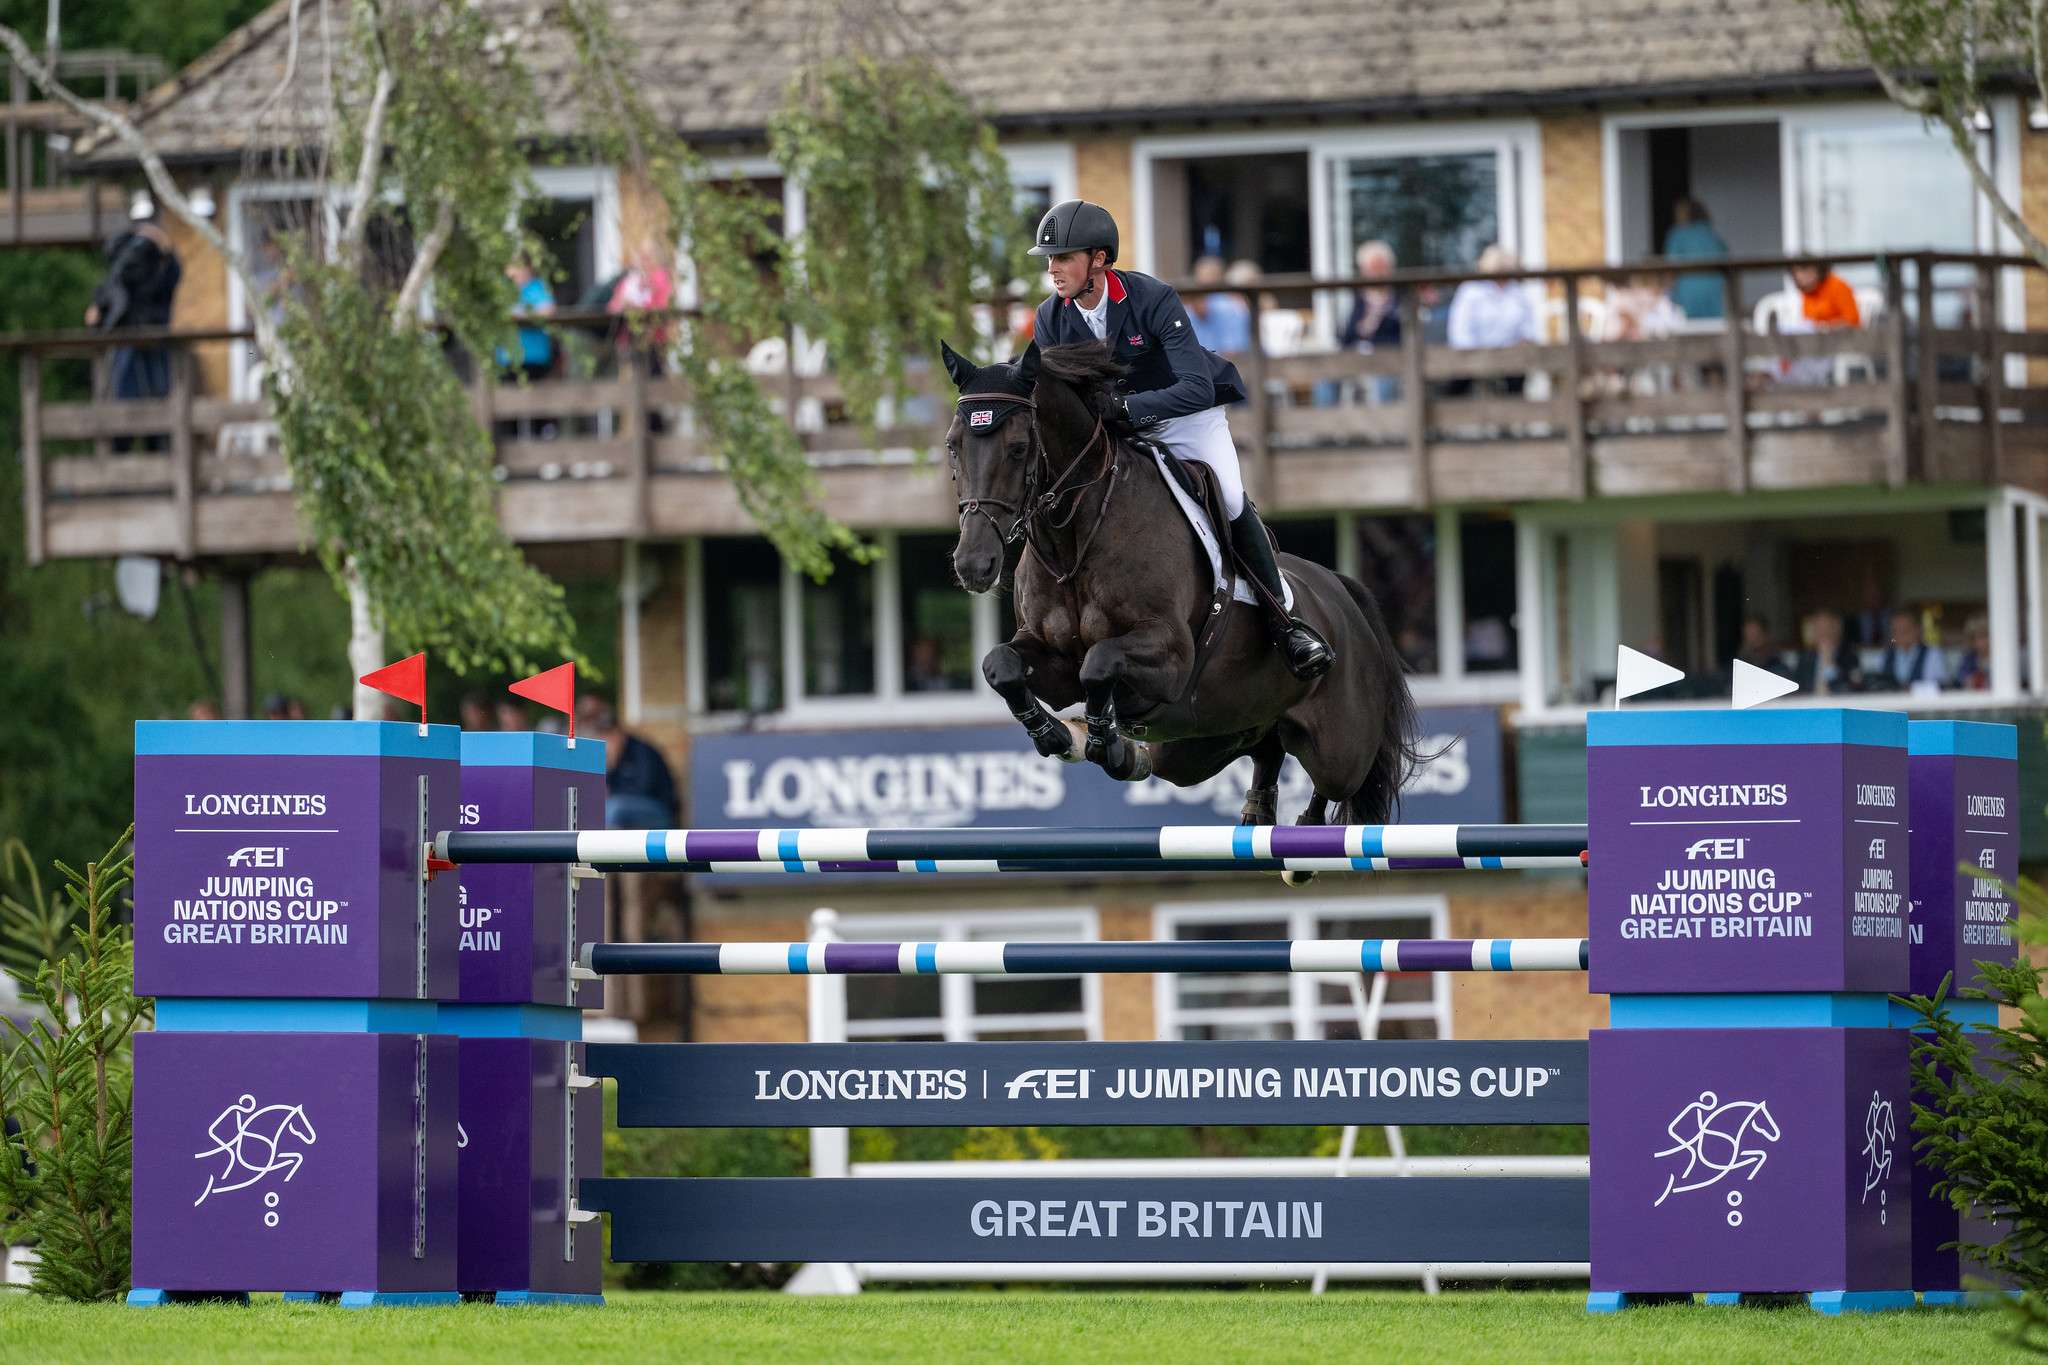 Ben MAHER (GBR) & EXIT REMO compete in the LONGINES FEI Jumping Nations Cupâ¢ of Great Britain - Longines Royal International Horse Show - Hickstead, West Sussex, United Kingdom - 28 July 2023, Copyright © FEI/Jon Stroud